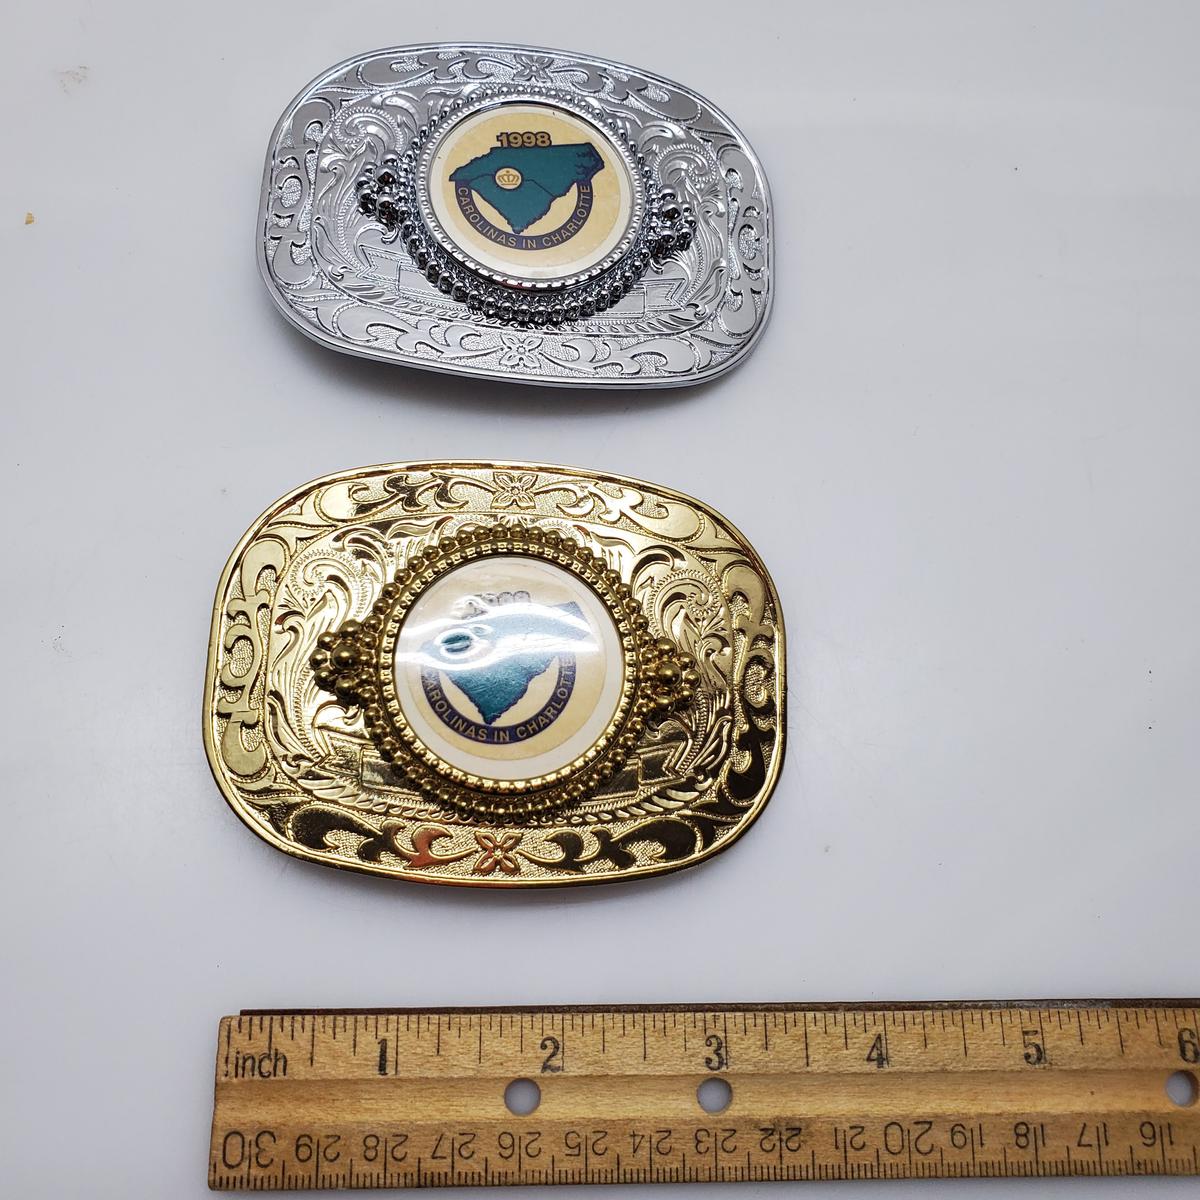 Gold Tone and Silver Tone Award Belt Buckles